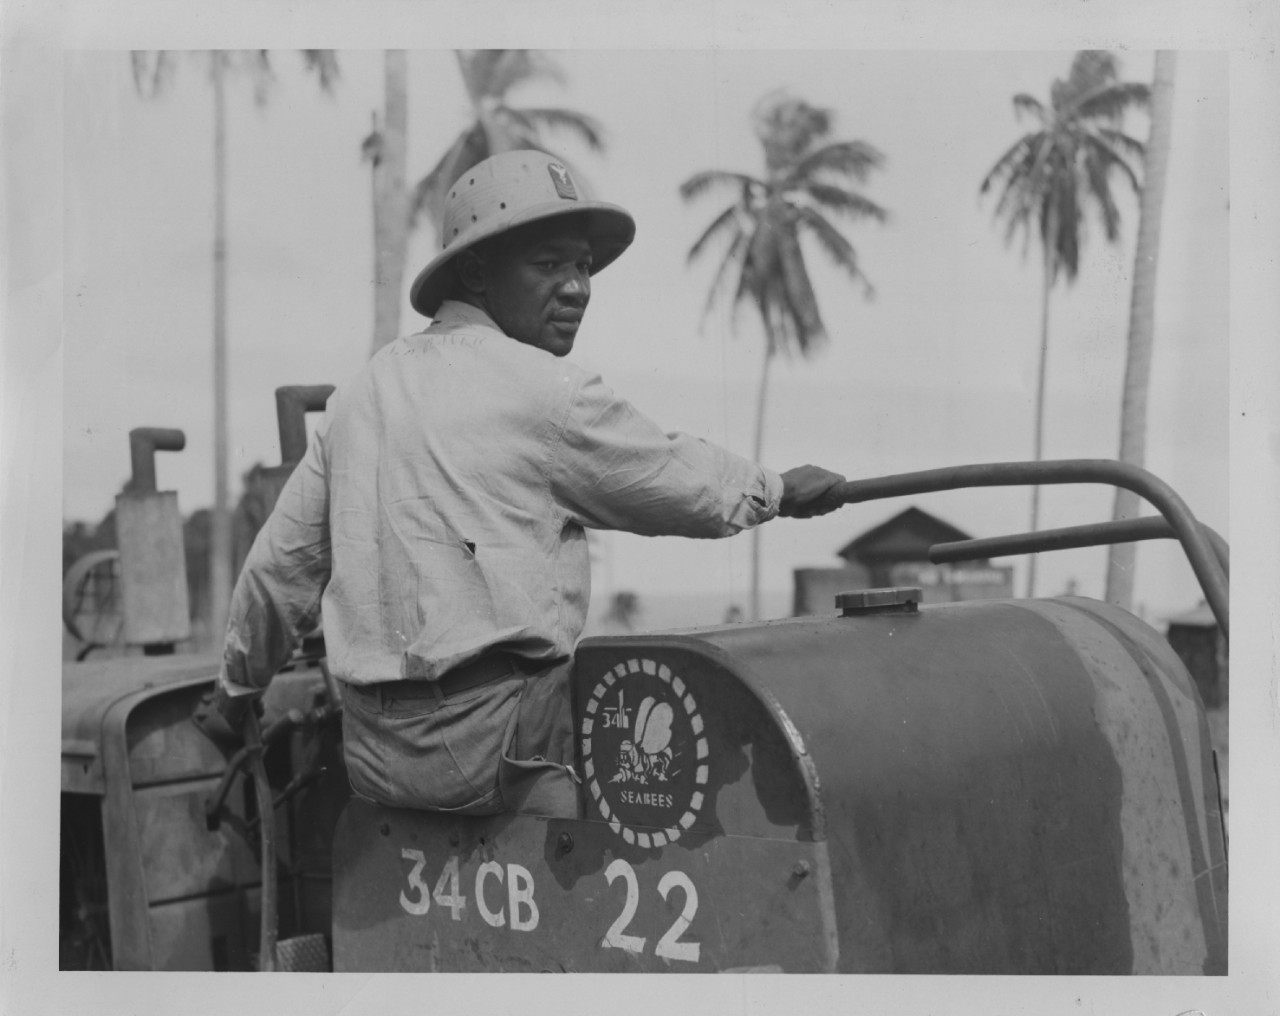 34th Naval Construction Battalion Seabee operating a bulldozer, 1943. Image is black and white.